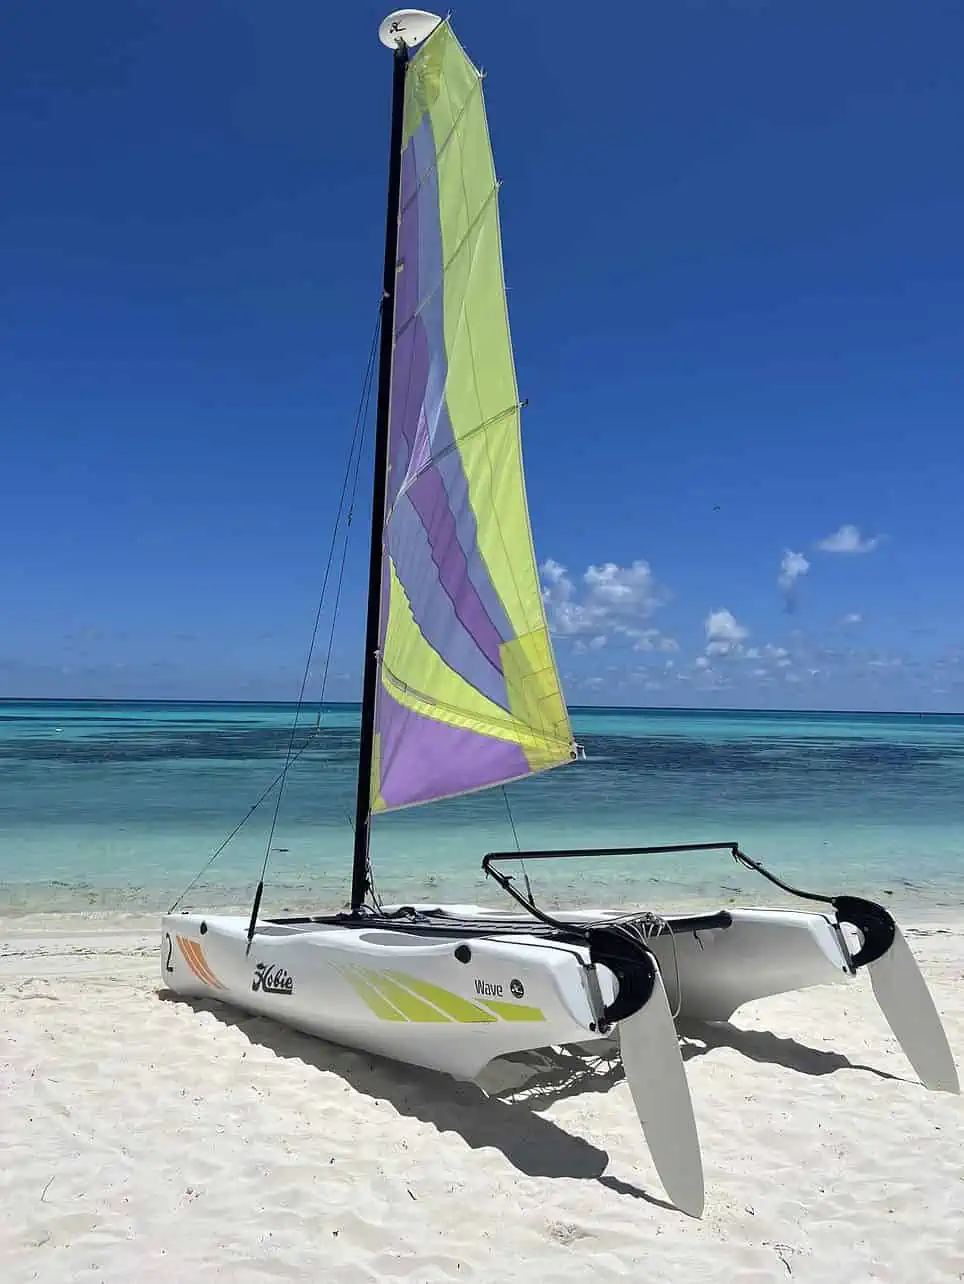 Hobie-Cat at Club Med in the Maldives.